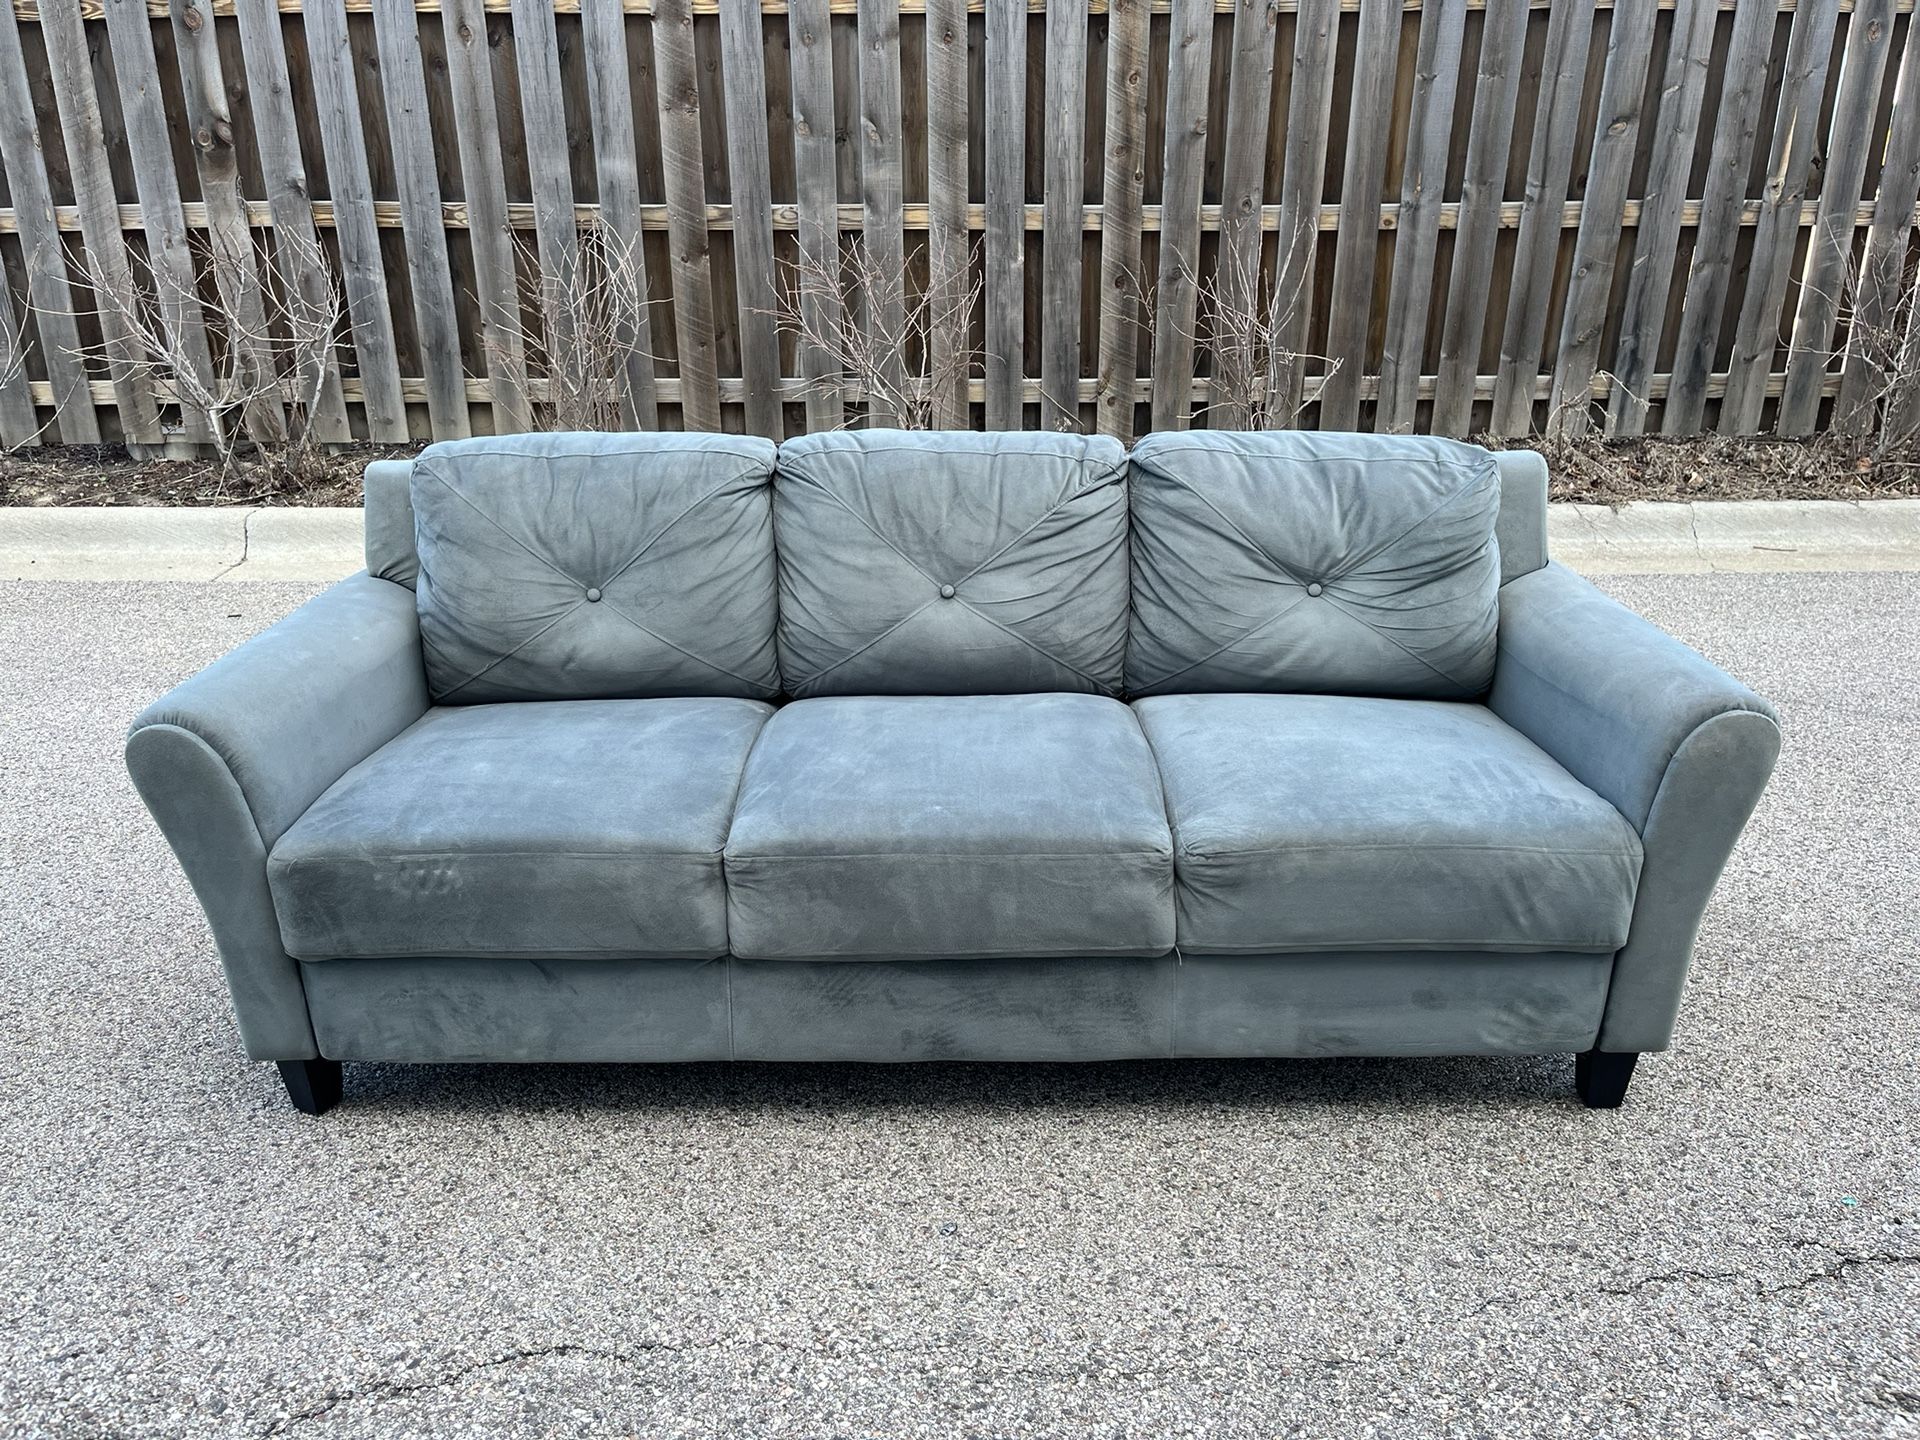 Beautiful Grayish / Blueish Couch! 🚚 ***Free Delivery***  